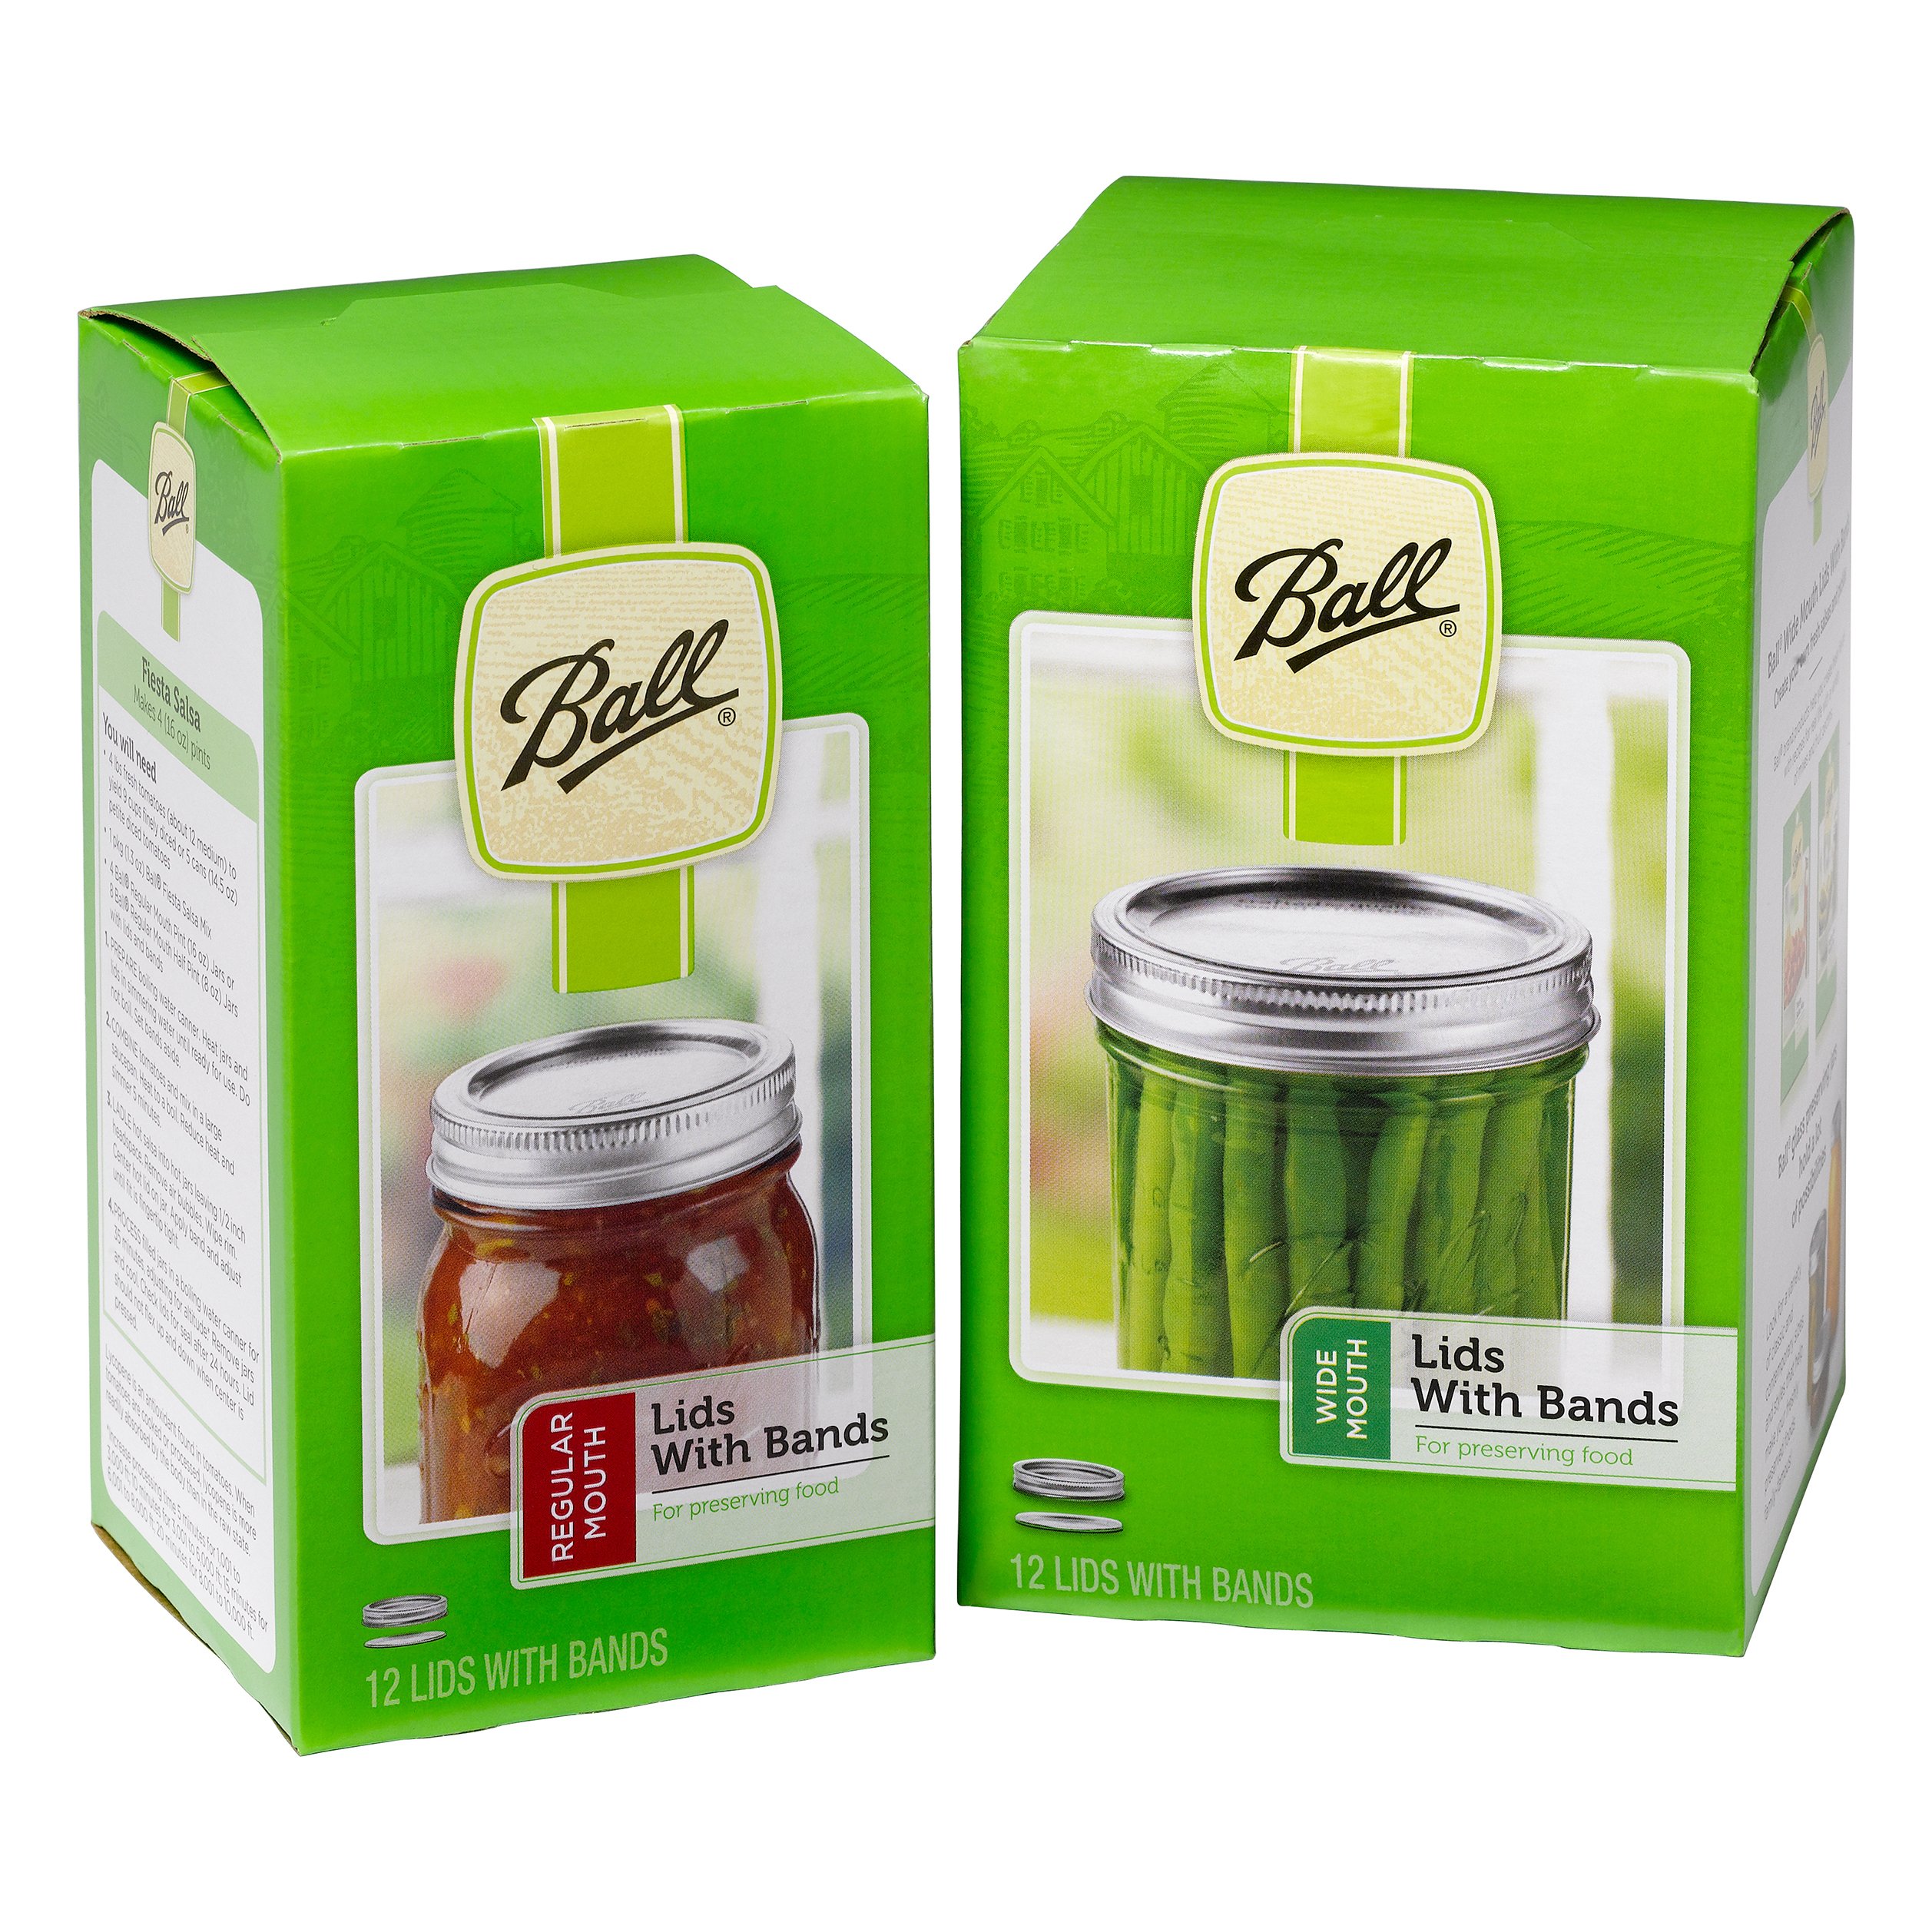 HOMKULA 9-Piece Canning Supplies, Includes 20 Quart Canning